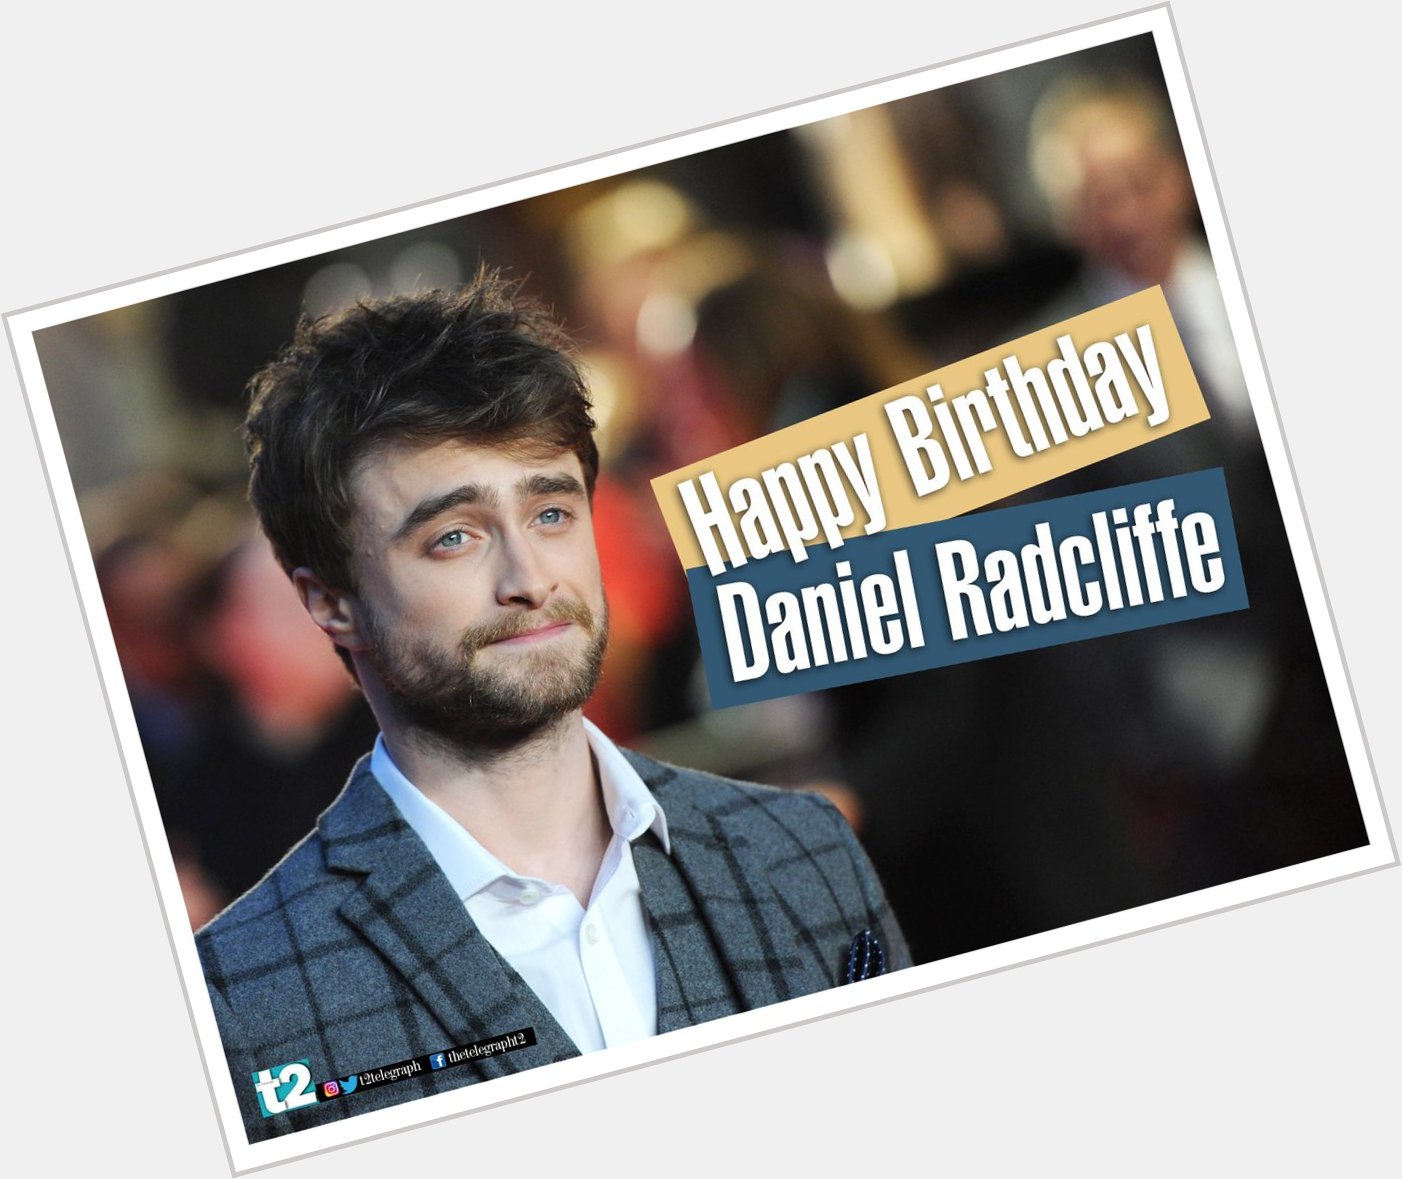 For us, he\s always be Harry Potter! t2 wishes Daniel Radcliffe a very happy birthday! 